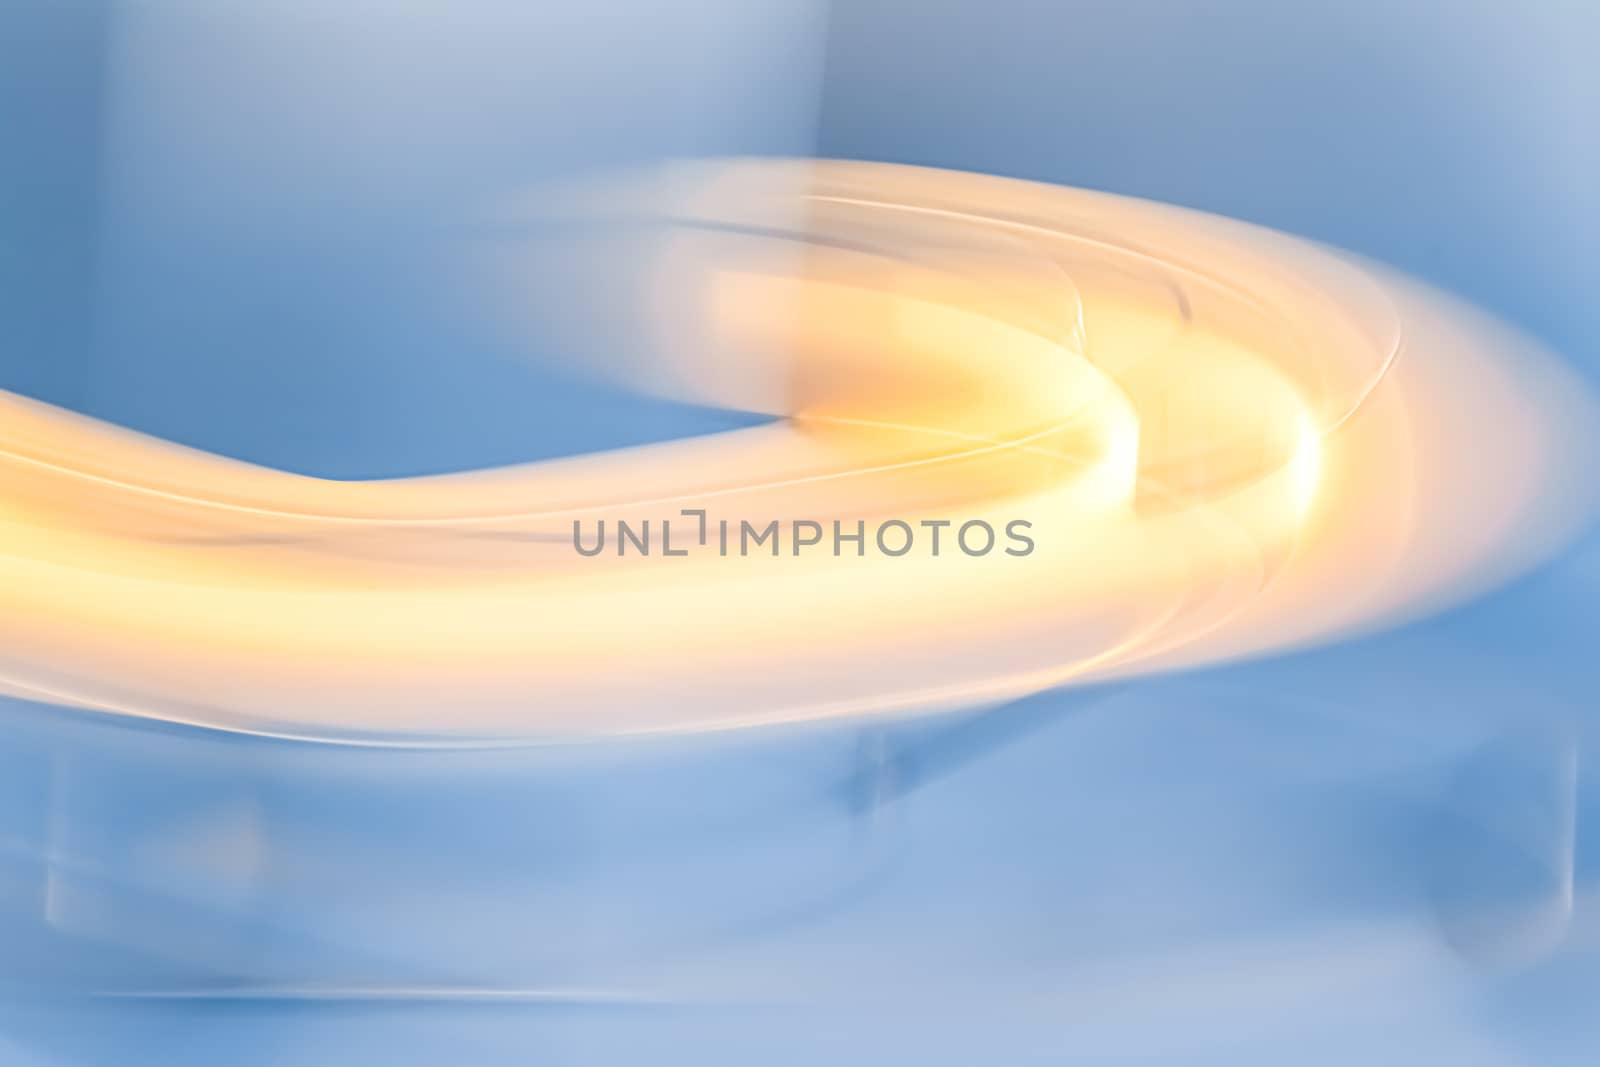 Light waves as abstract futuristic background, science and high tech designs